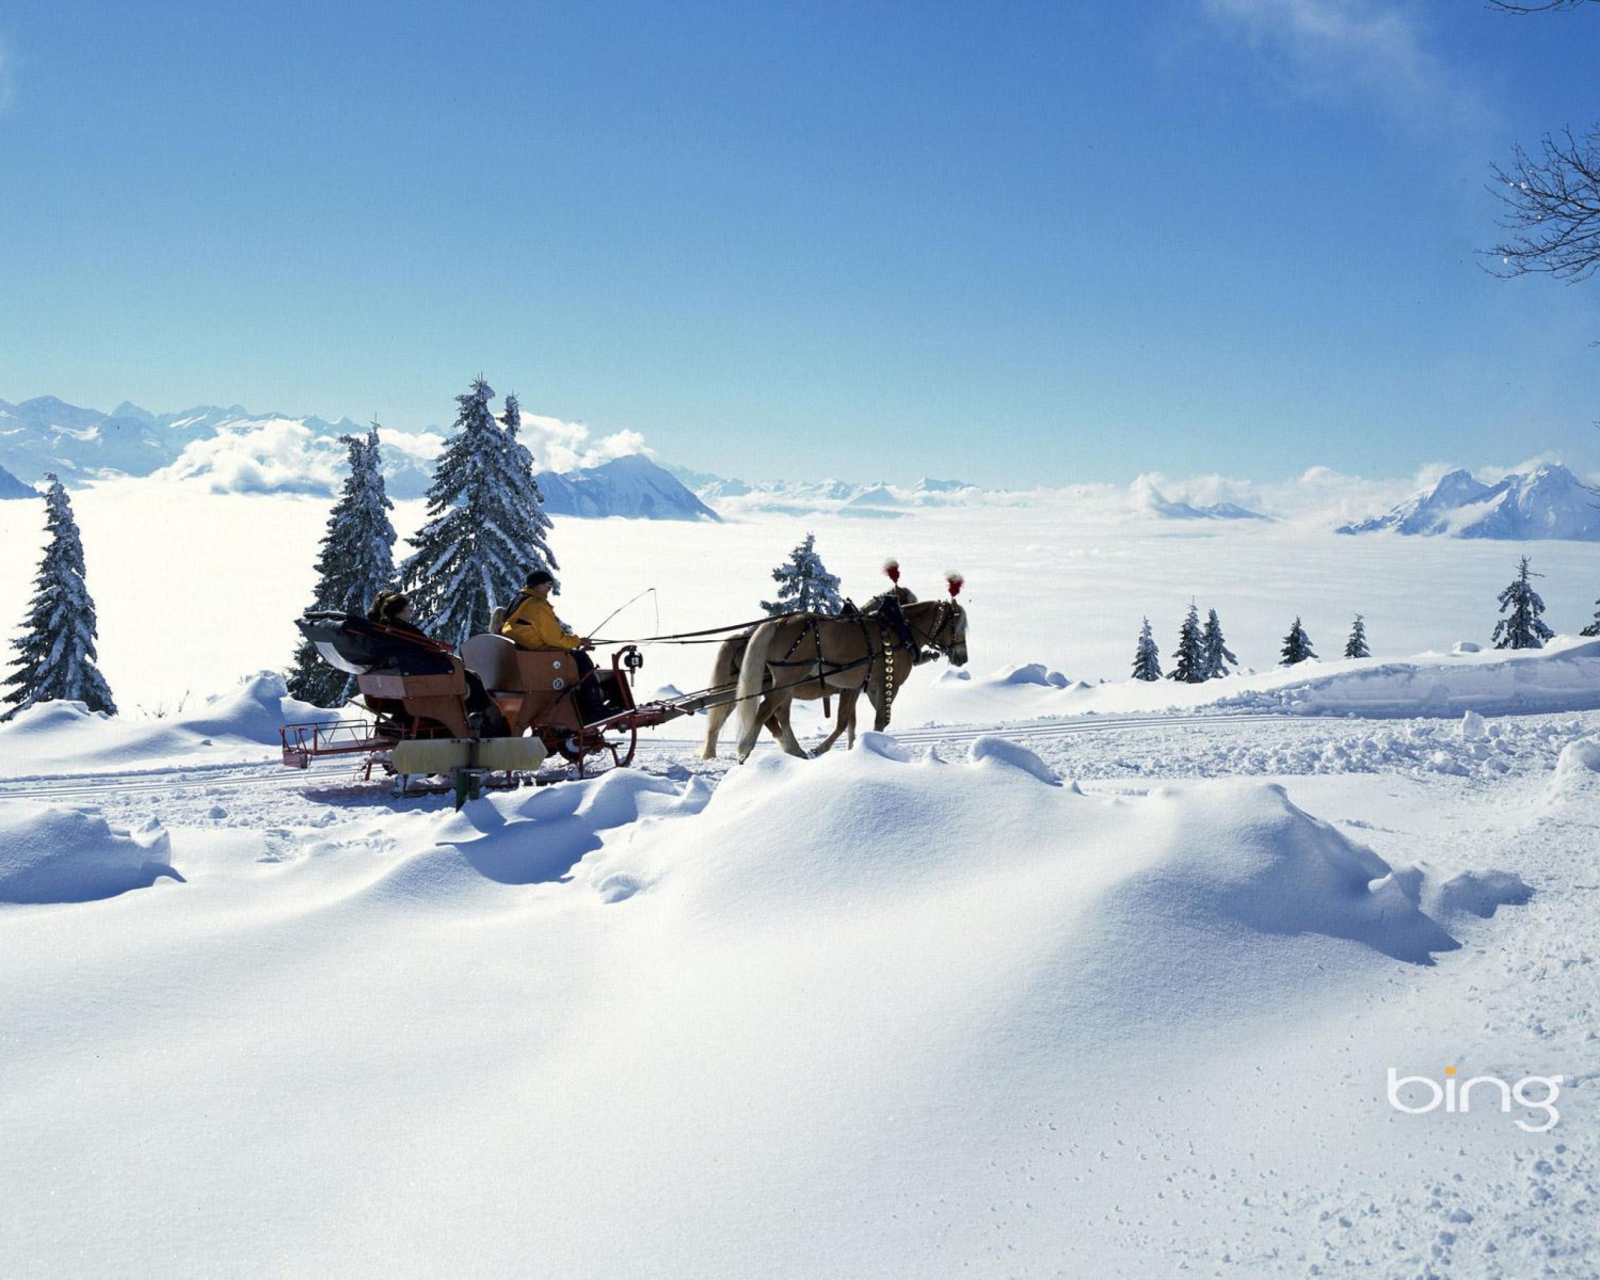 Winter Snow And Sleigh With Horses wallpaper 1600x1280